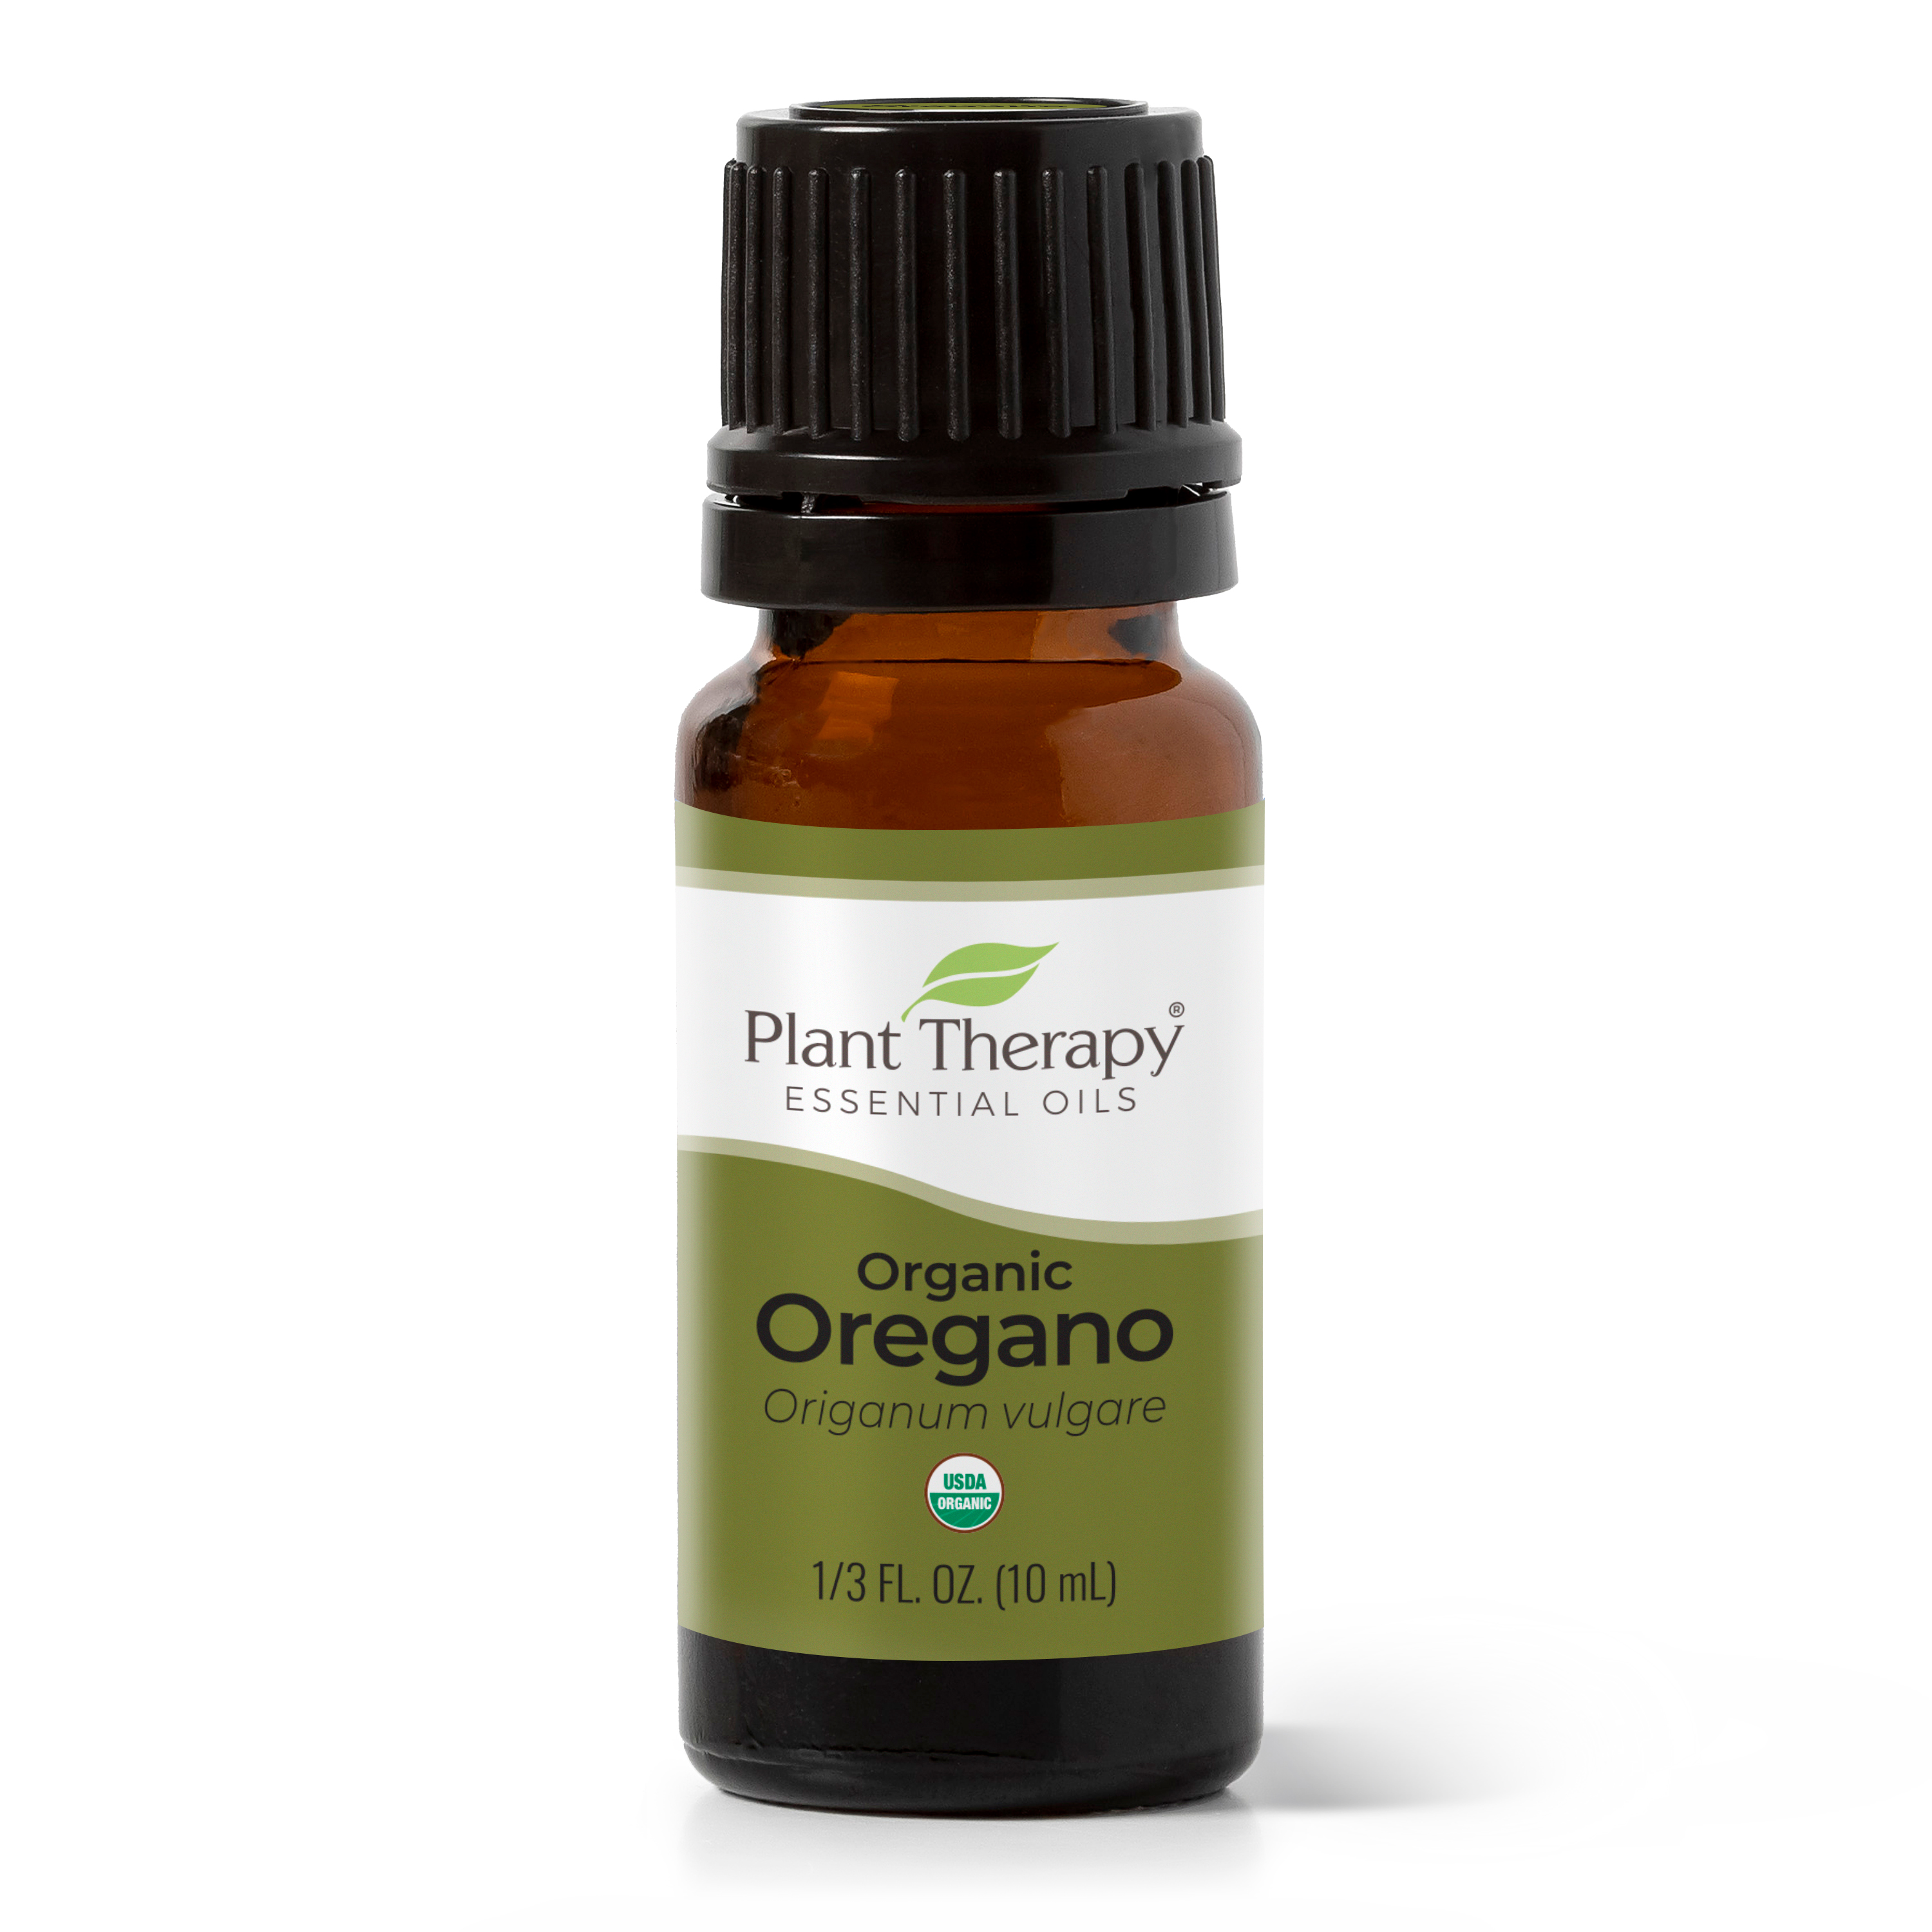 Plant Therapy Organic Oregano Essential Oil 100% Pure, USDA Certified Organic, Undiluted, Natural Aromatherapy, Therapeutic Grade 10 mL (1/3 oz) - image 1 of 7